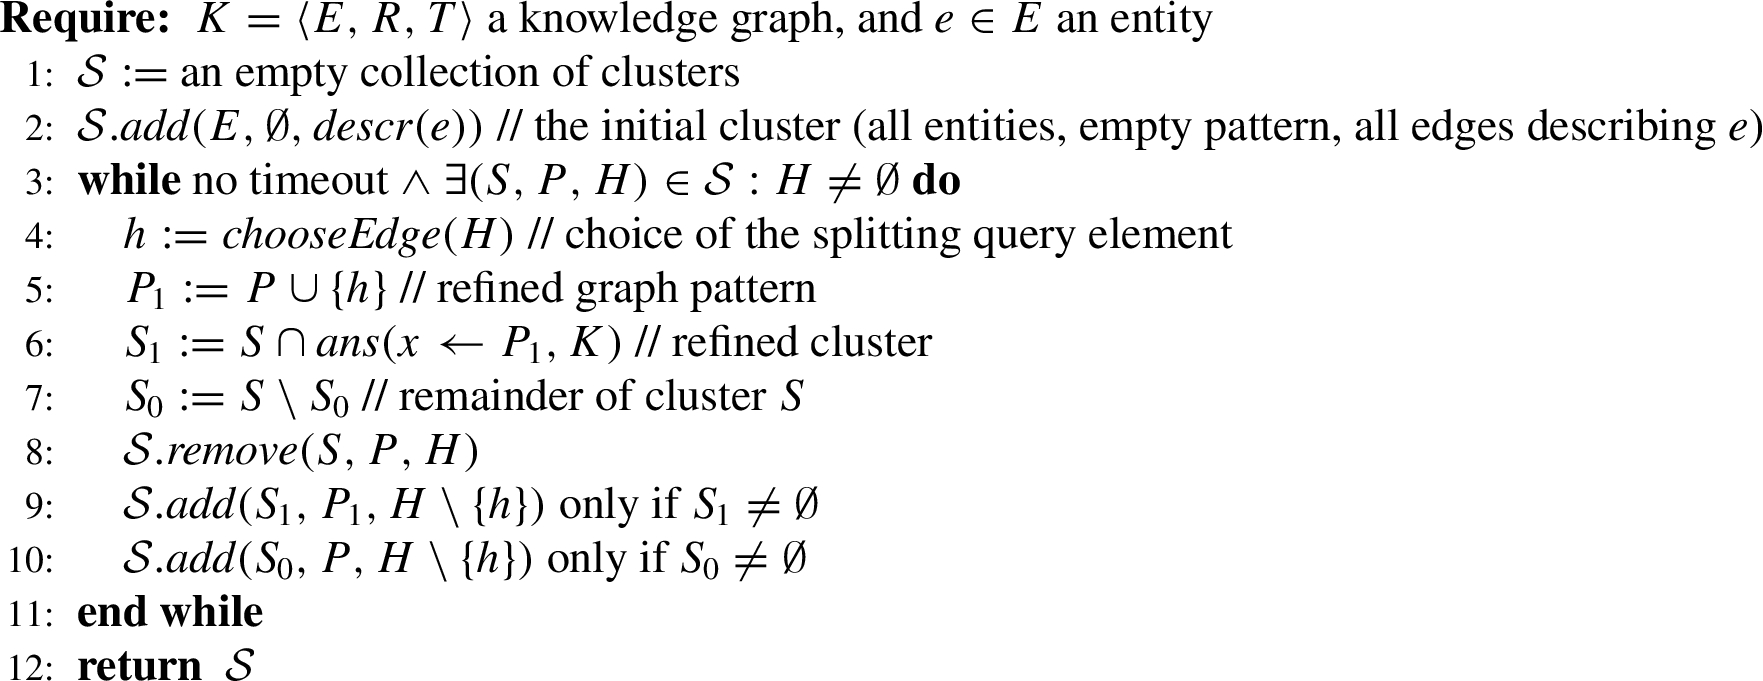 Partitioning algorithm for entity e in knowledge graph K